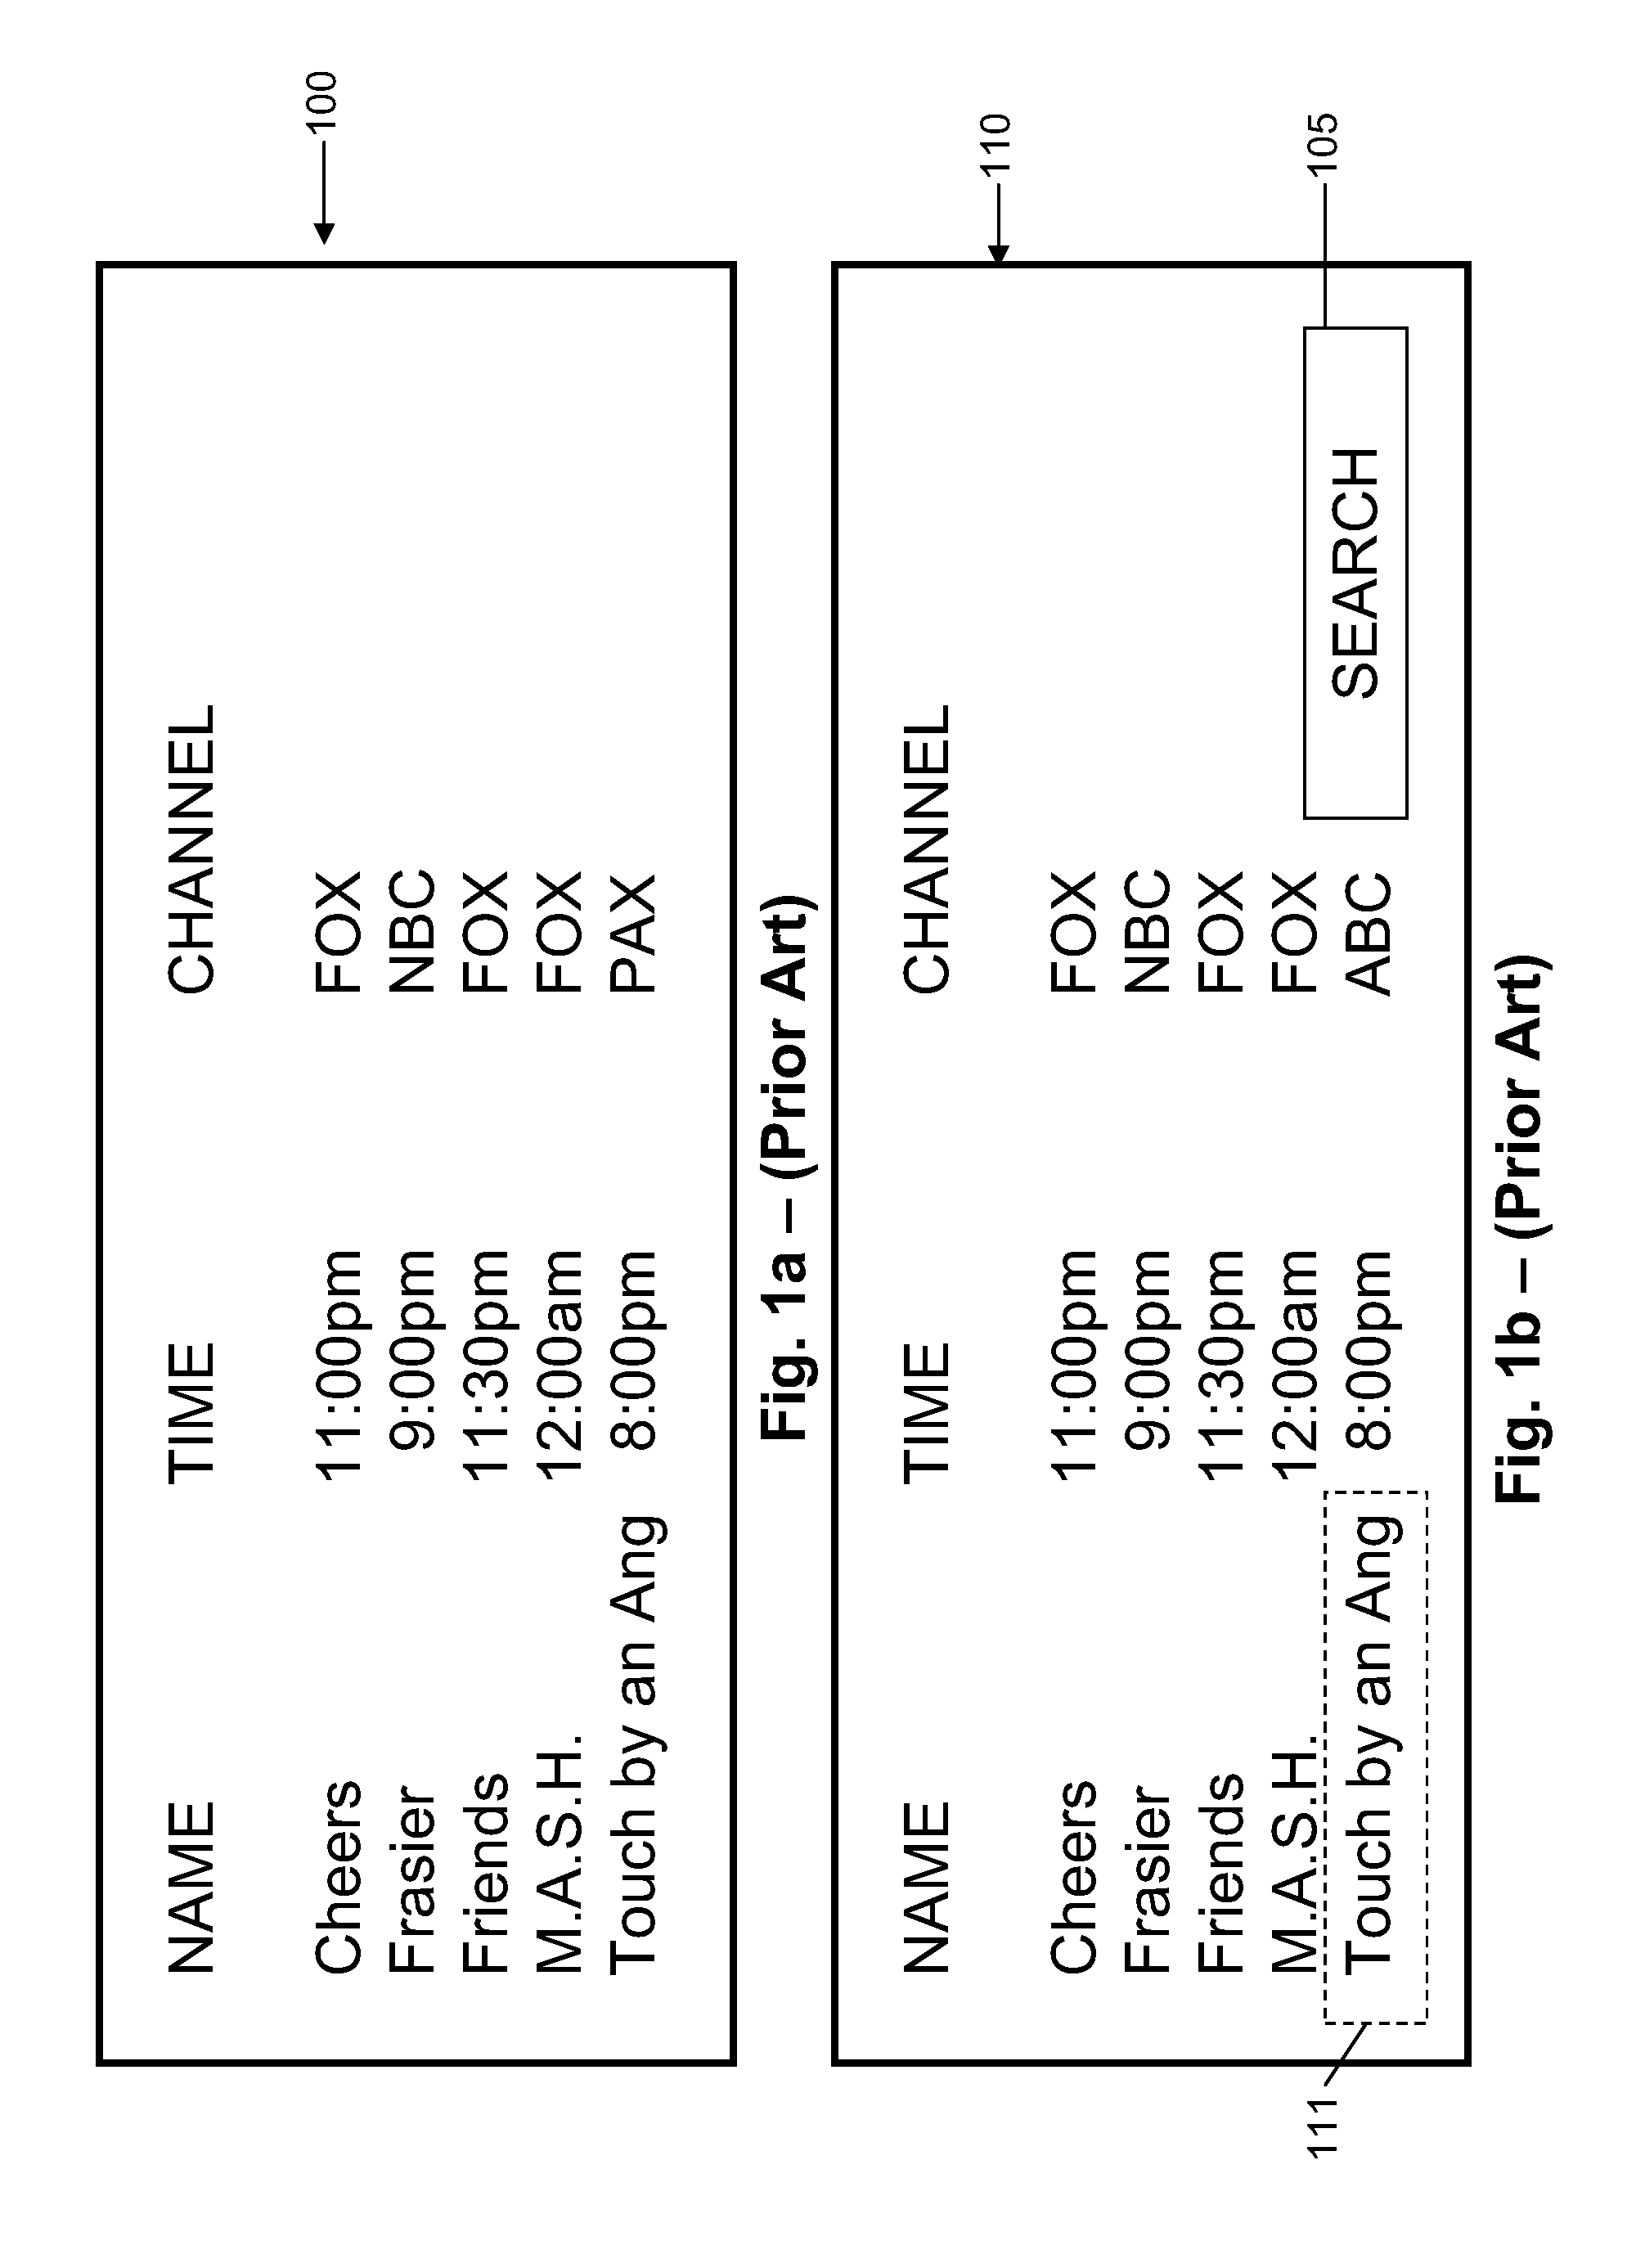 Method and Apparatus For Finding The Same Or Similar Shows